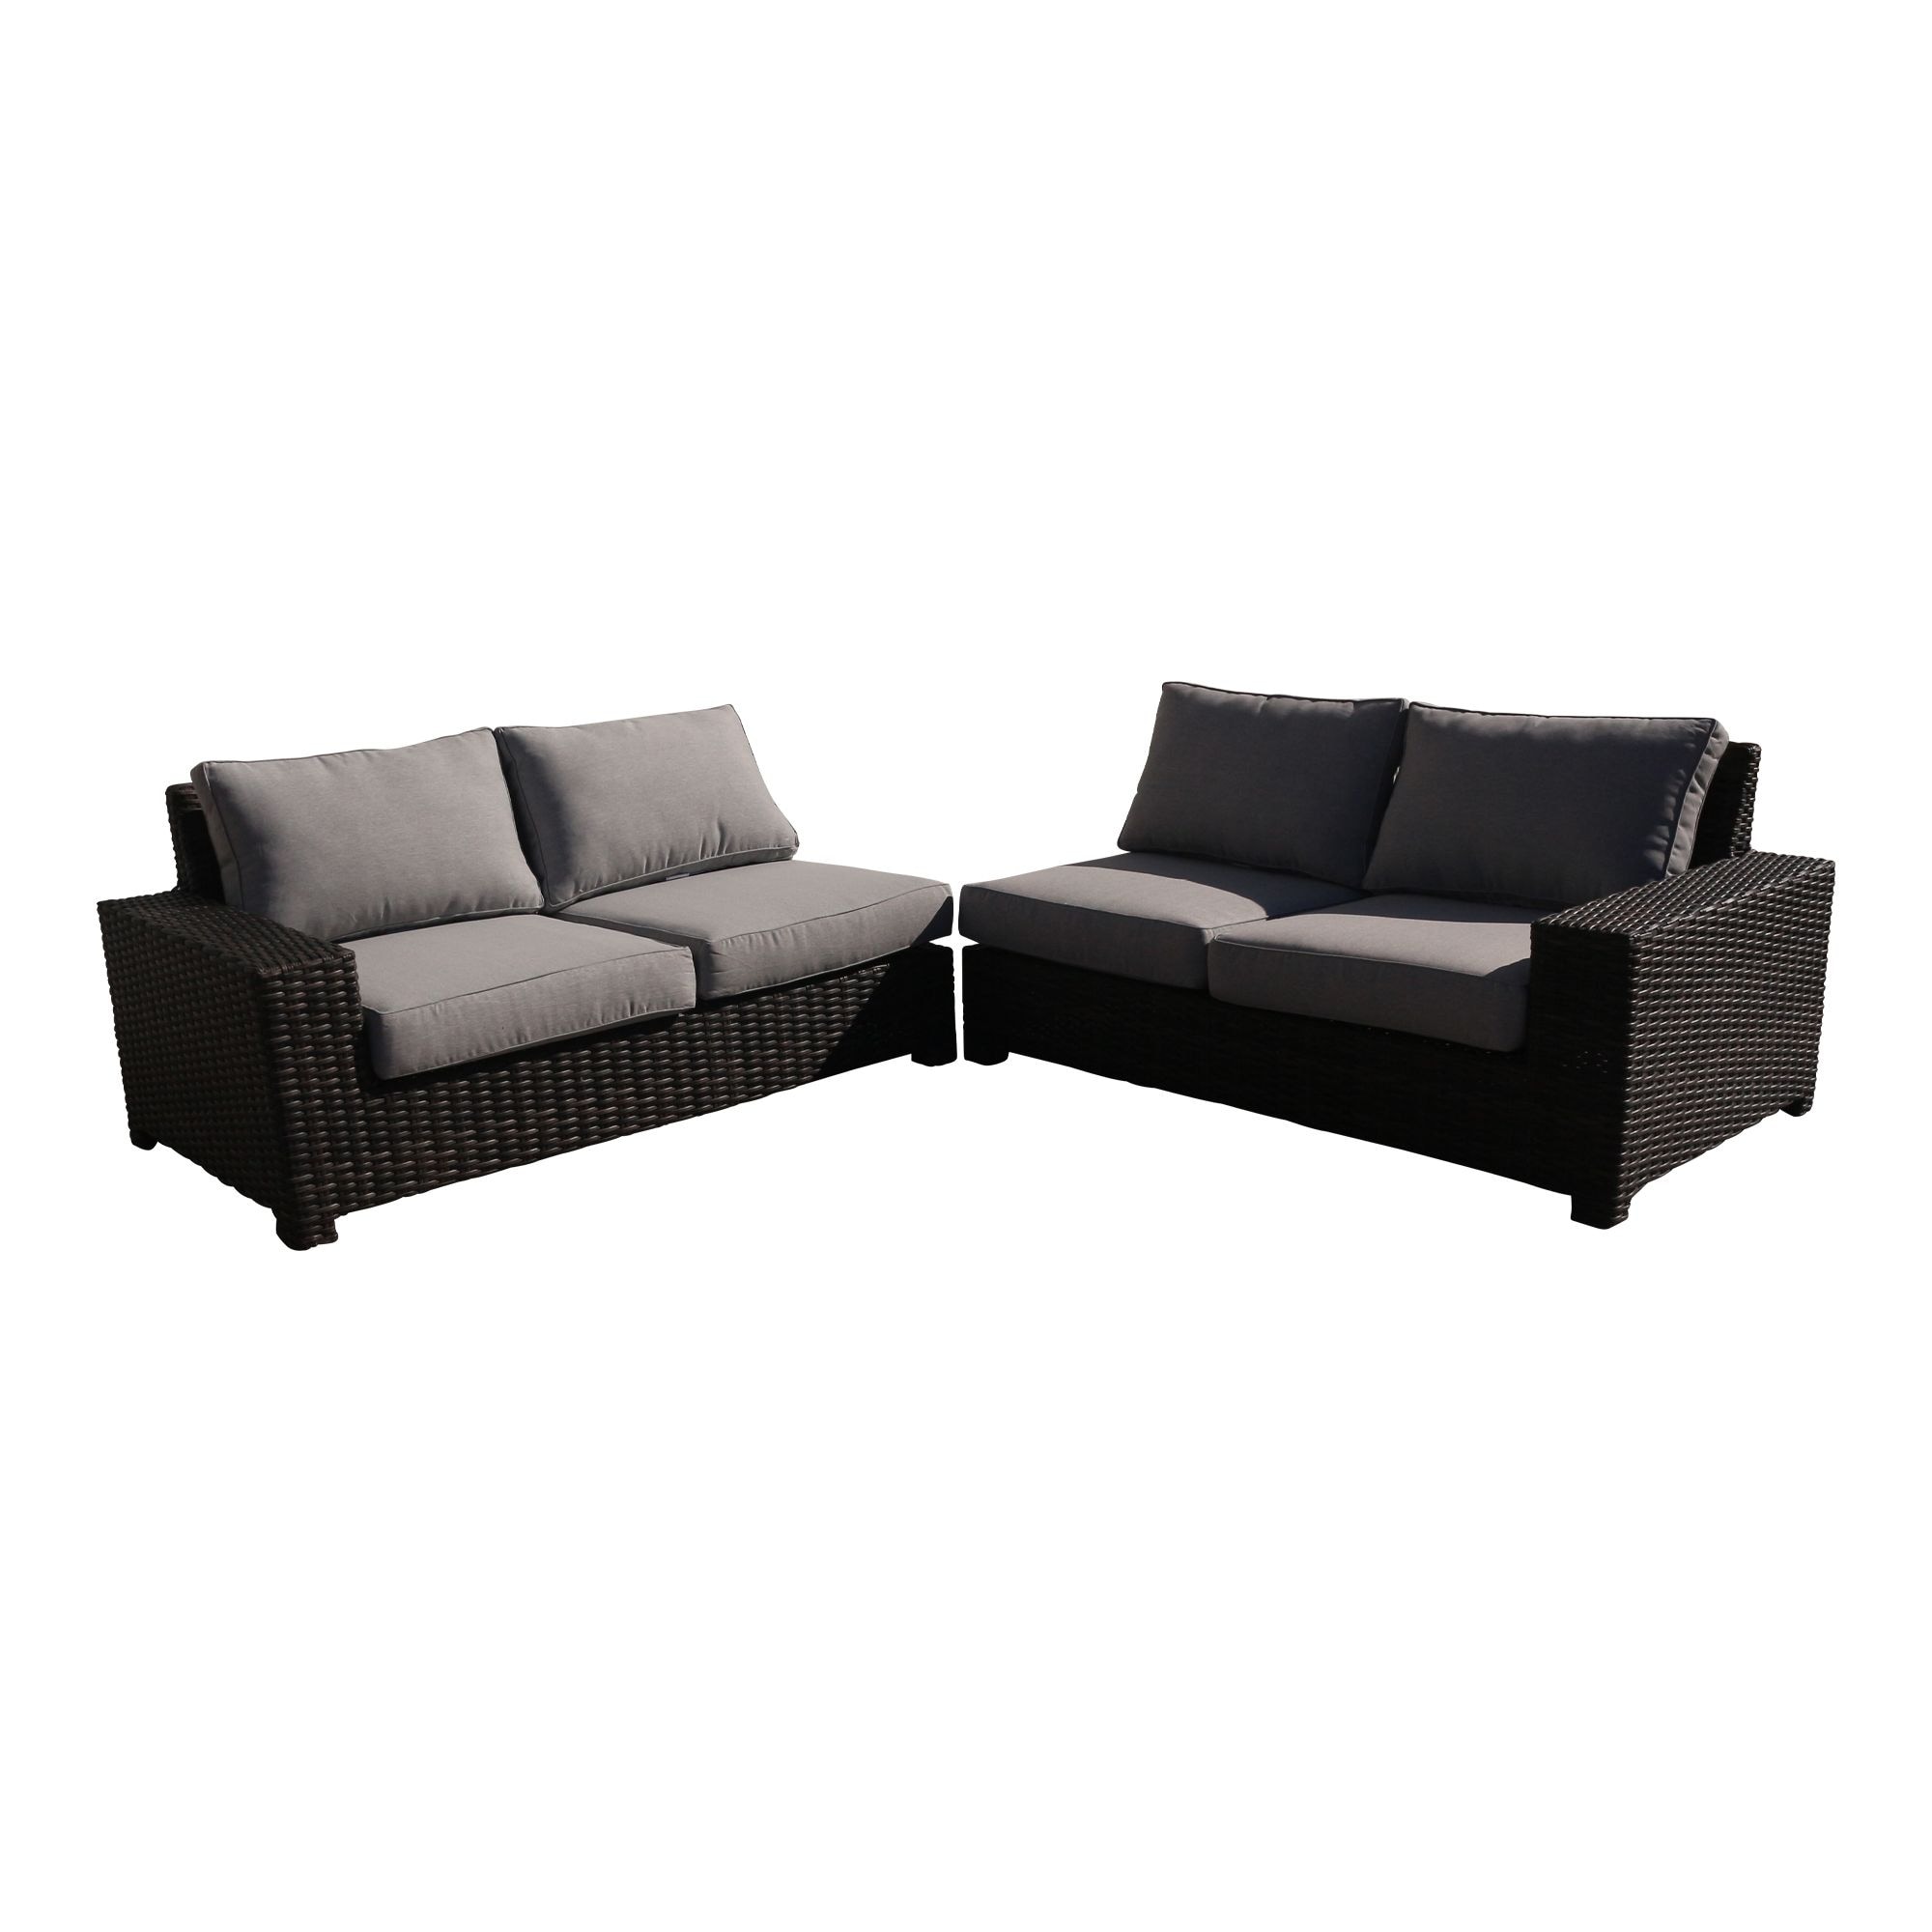 Courtyard Casual St Lucia Silver Oak 2 Piece Sectional Set With 1 Left Loveseat And 1 Right Loveseat With Cushions